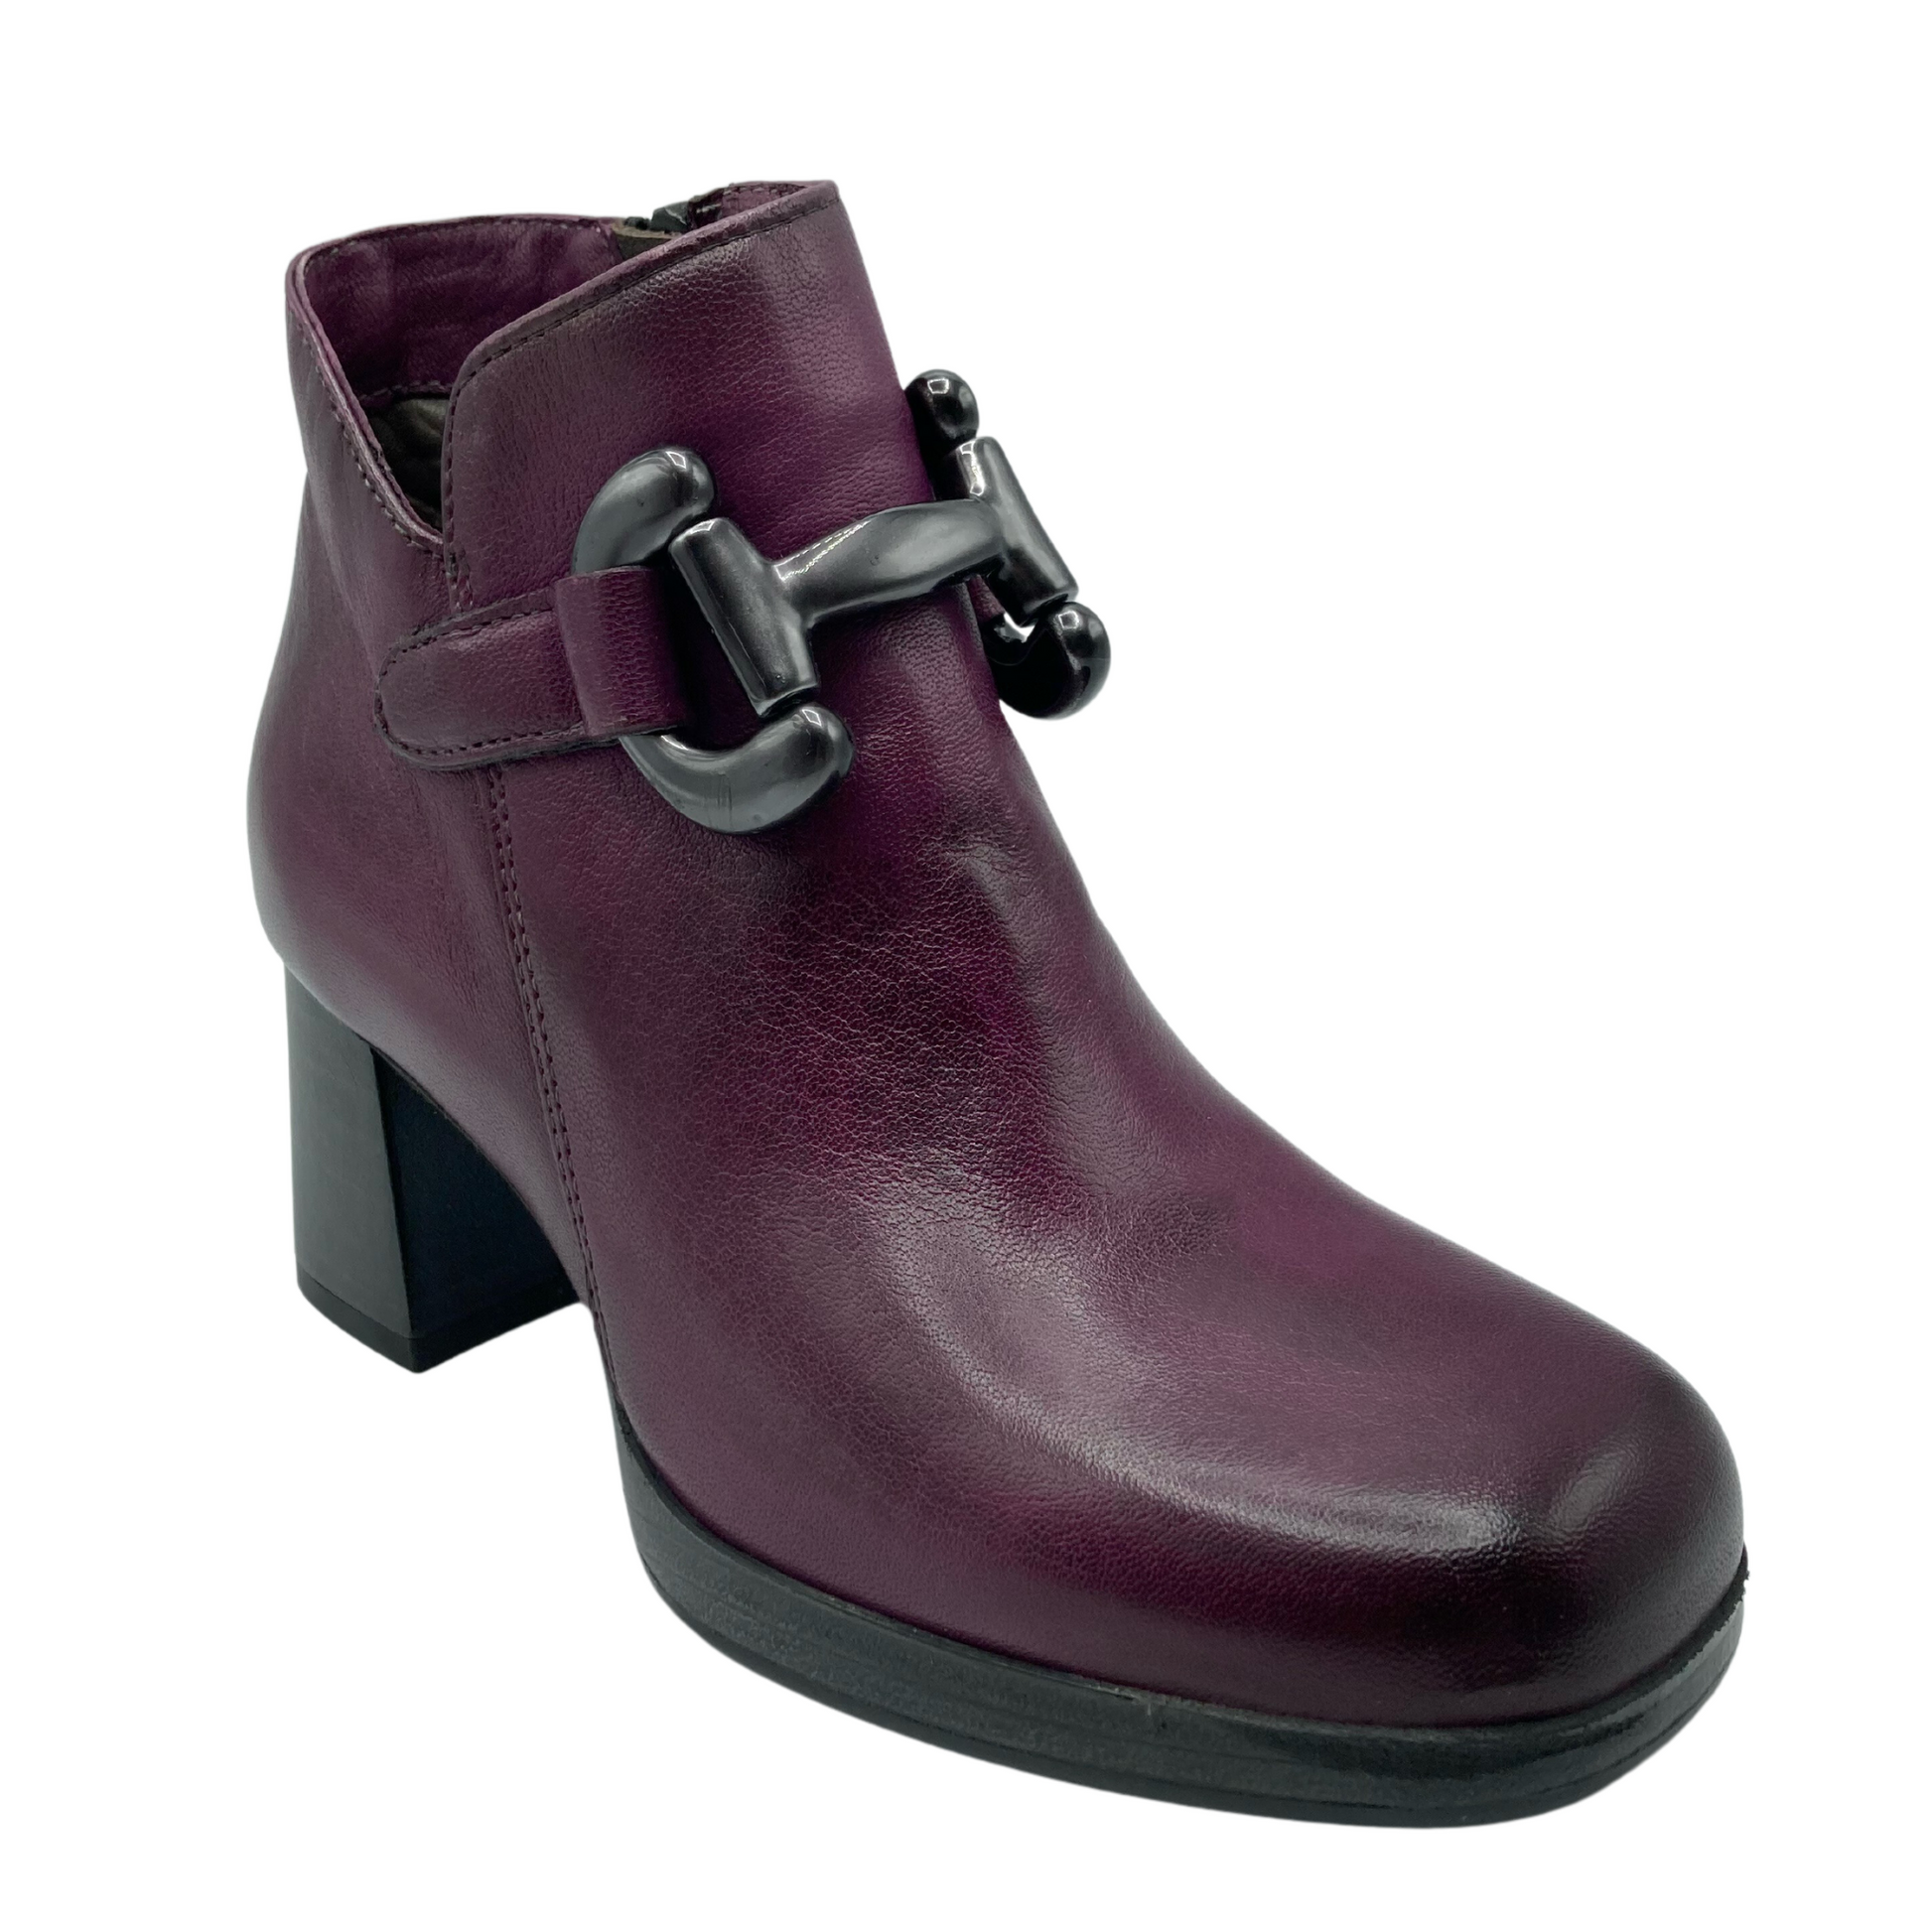 Angled view of purple leather ankle boot with bit detail